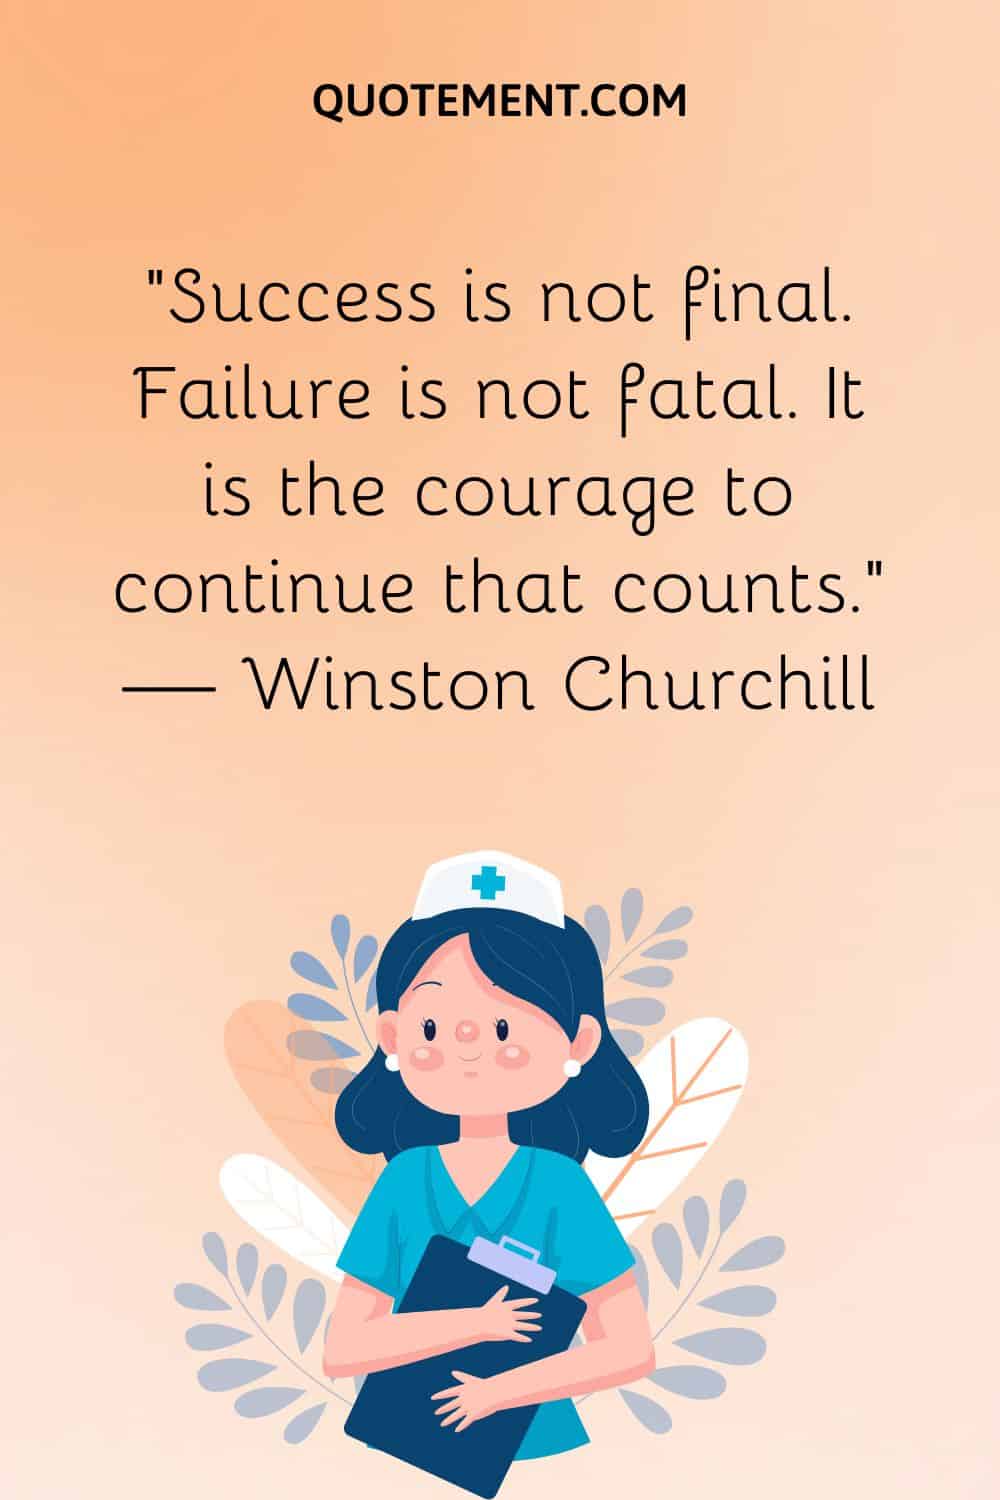 Success is not final. Failure is not fatal. It is the courage to continue that counts. — Winston Churchill